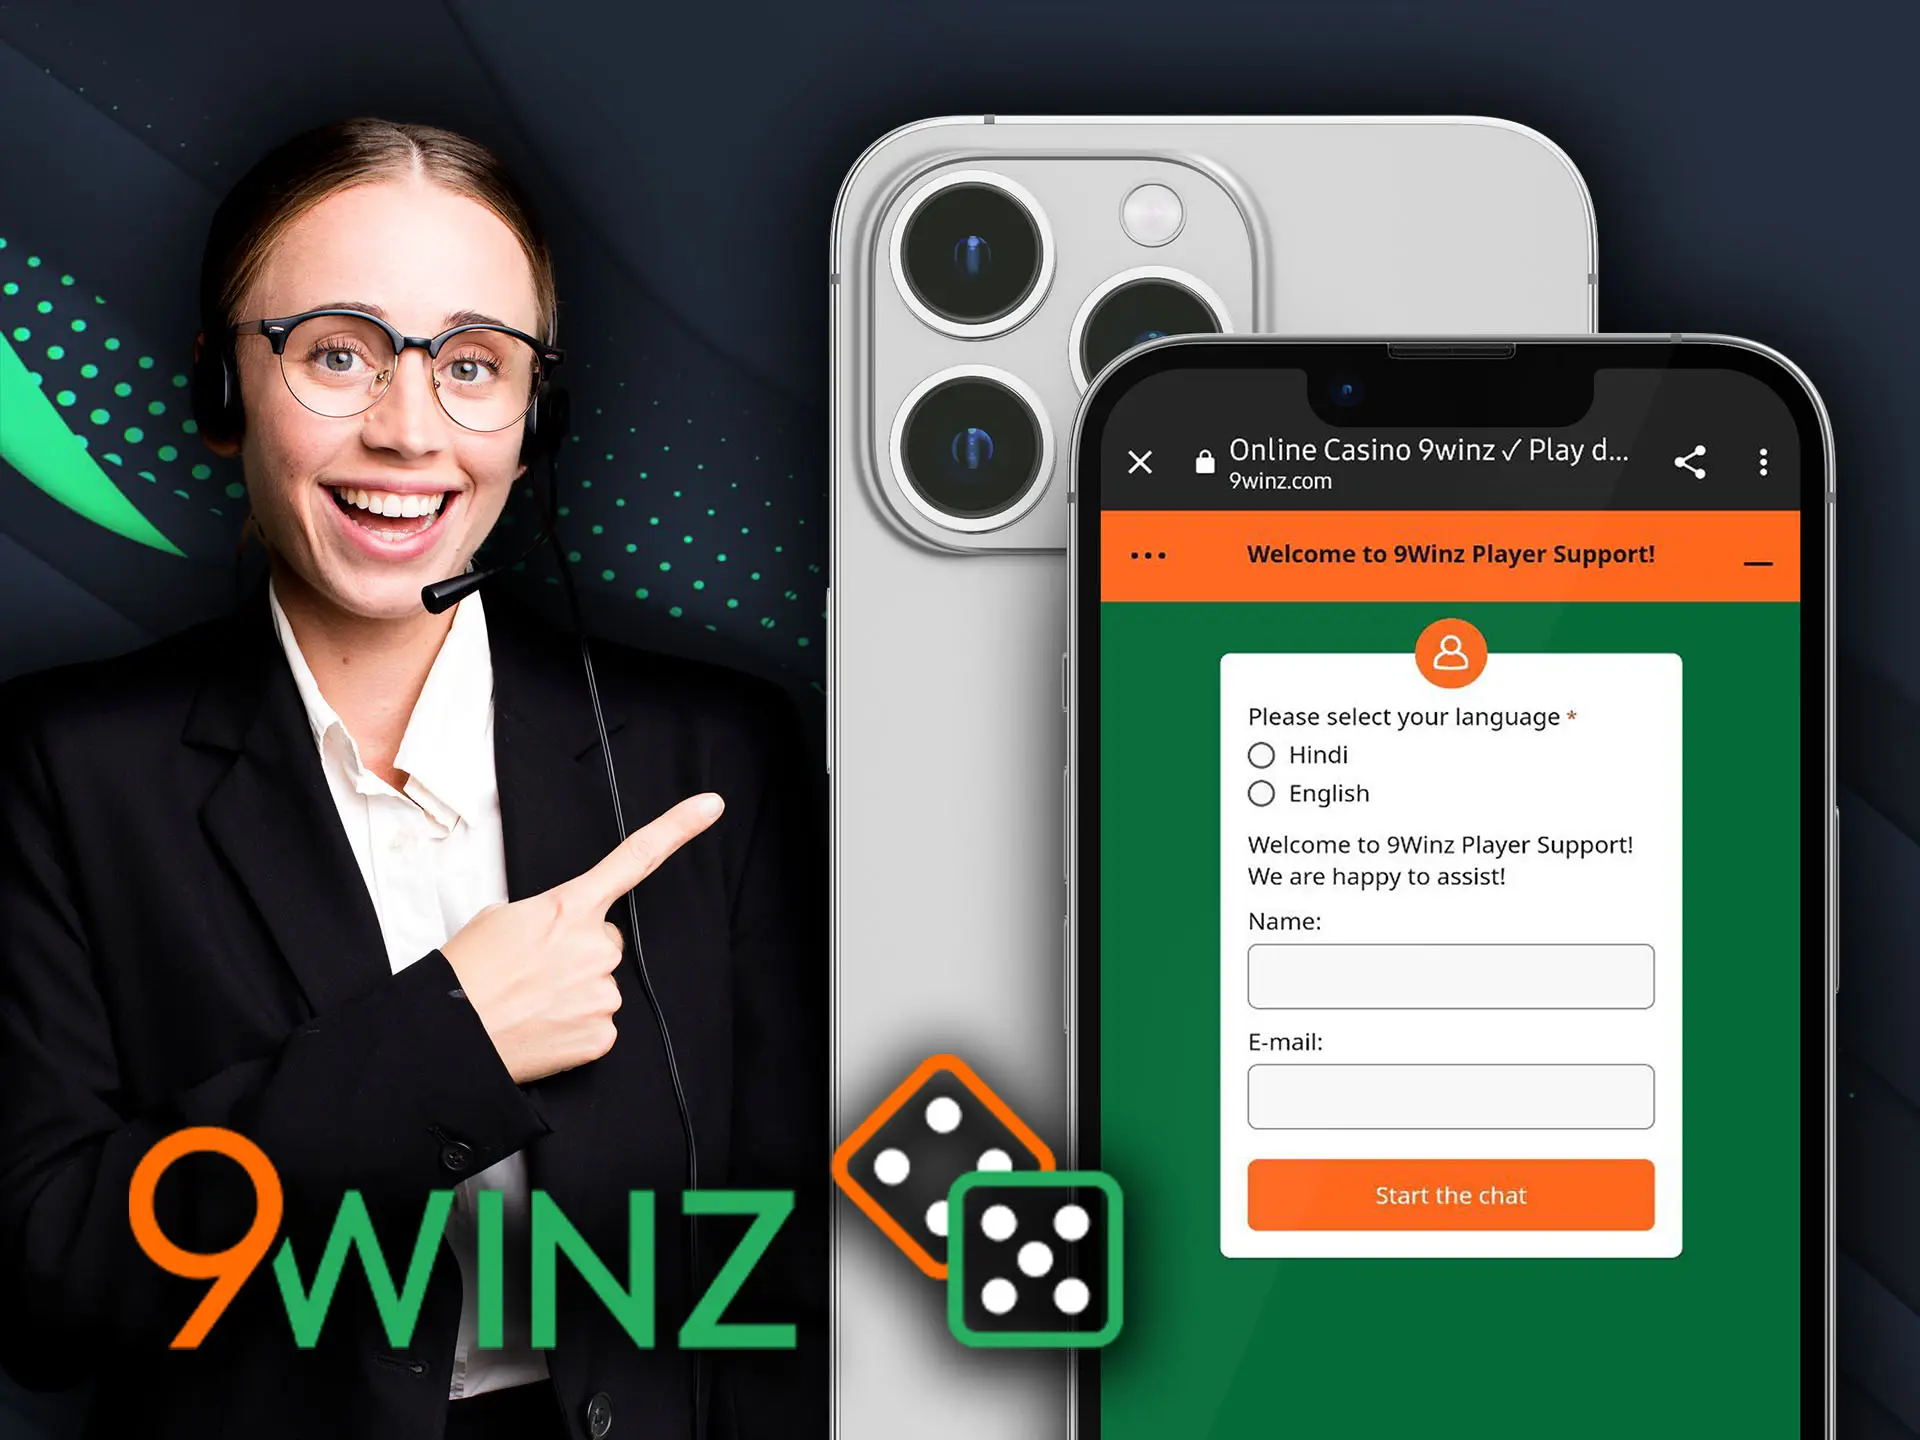 Use 9winz support in mobile version.